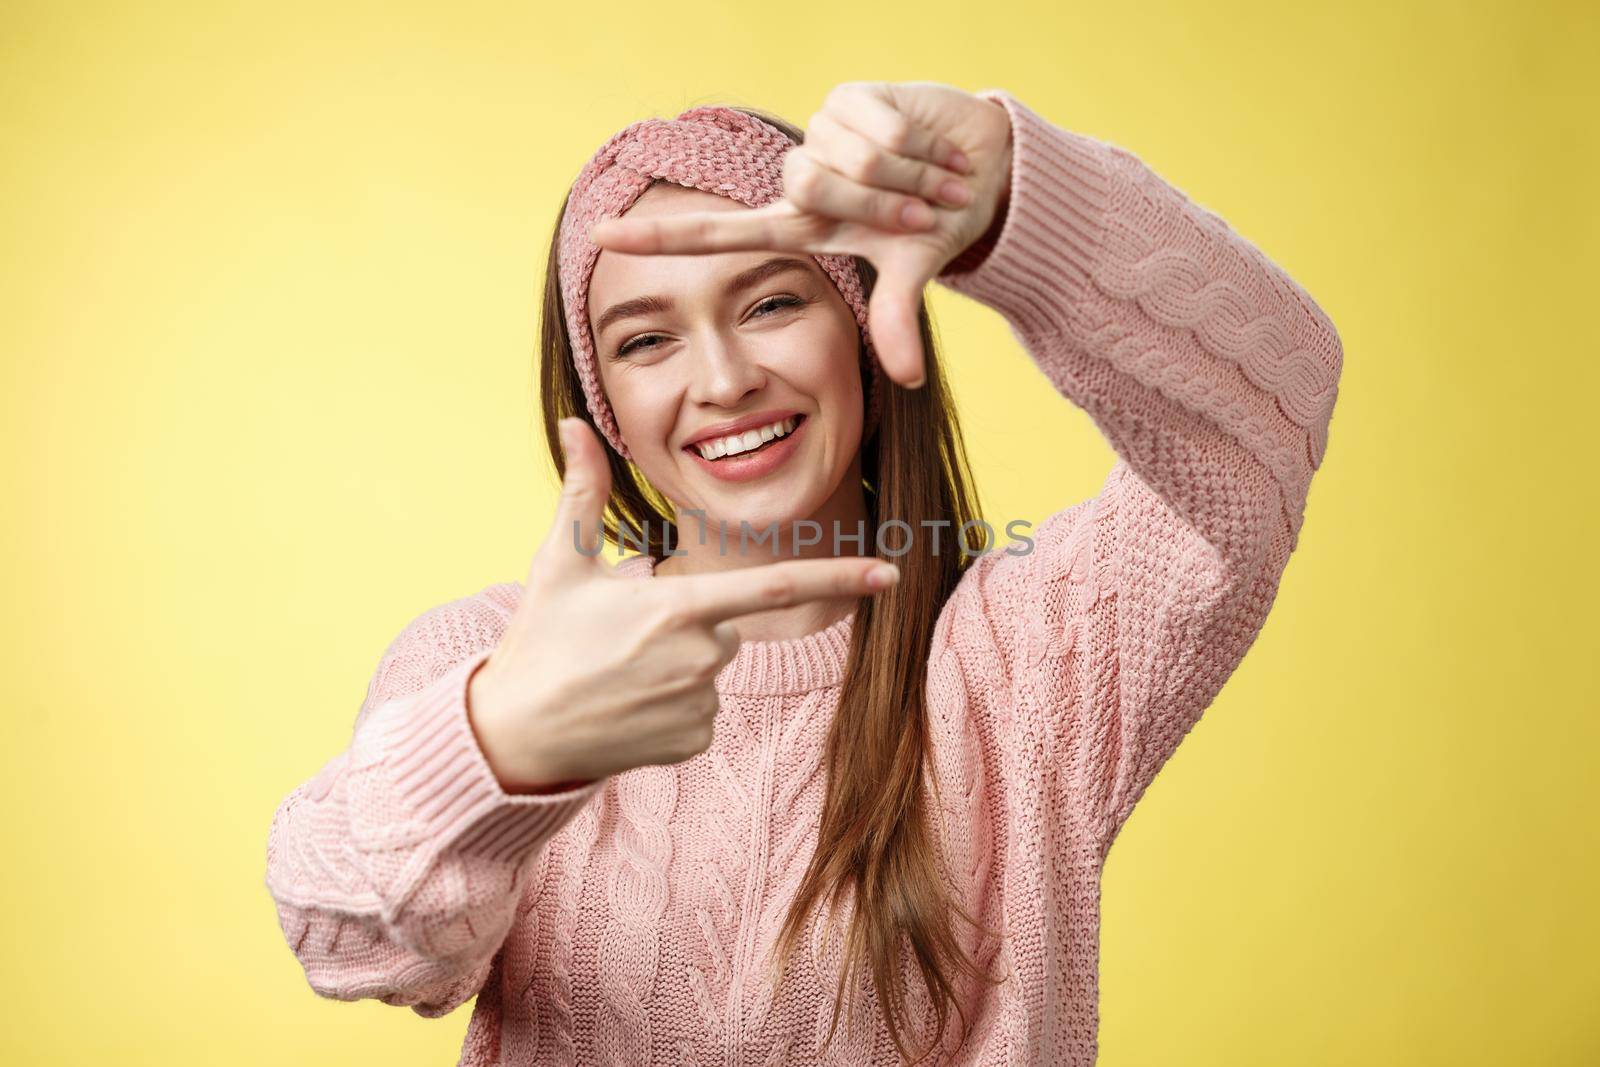 Charming outgoing, happy girl smiling cheerful, making frame of fingers looking through it excited and joyful, grinning, planning future, picturing how put furniture, posing cute over yellow wall.